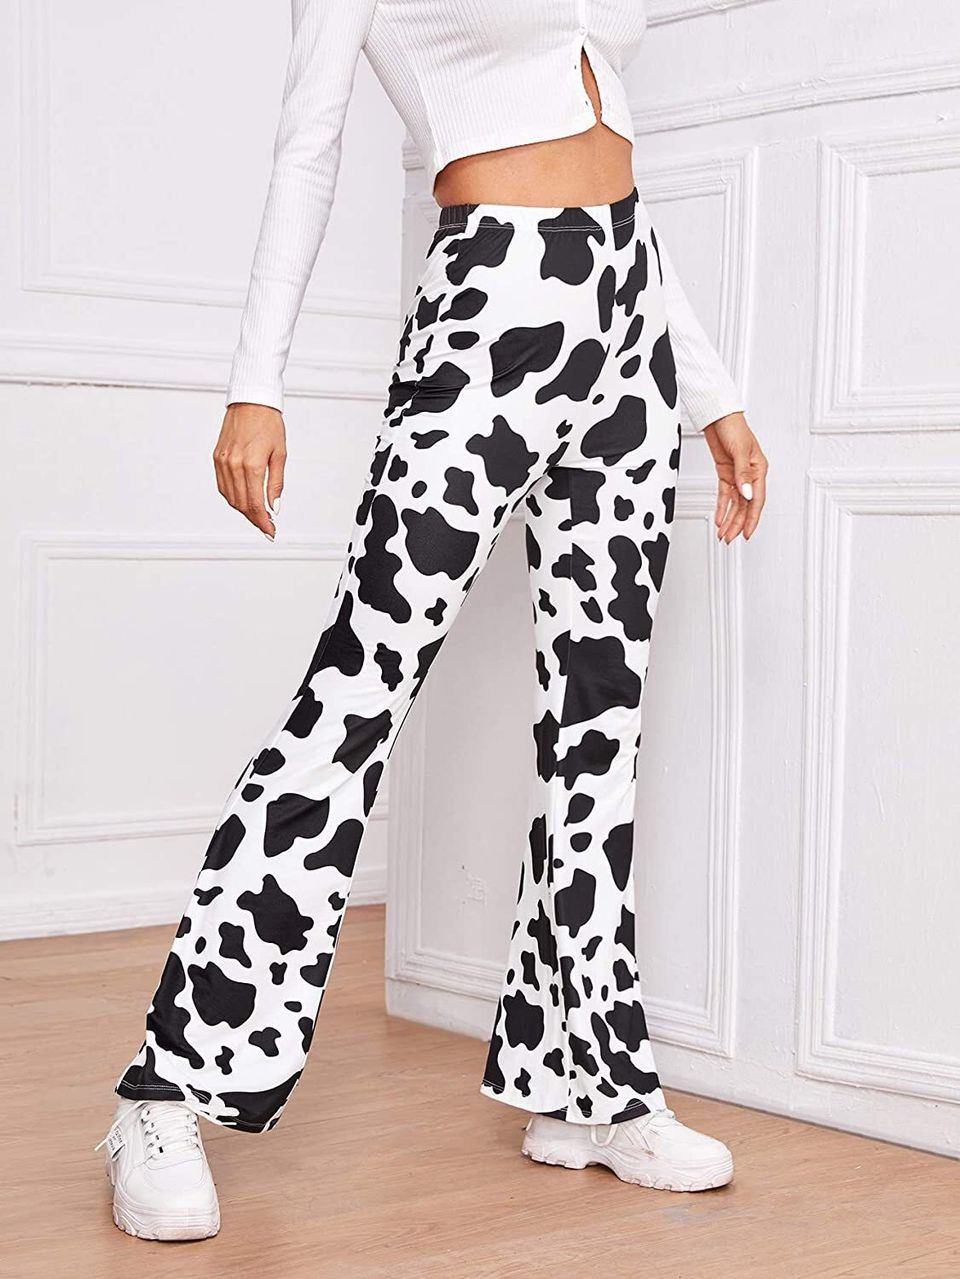 Shop The Trend: Cow-Print Clothes With A Rodeo Flair | HuffPost Life